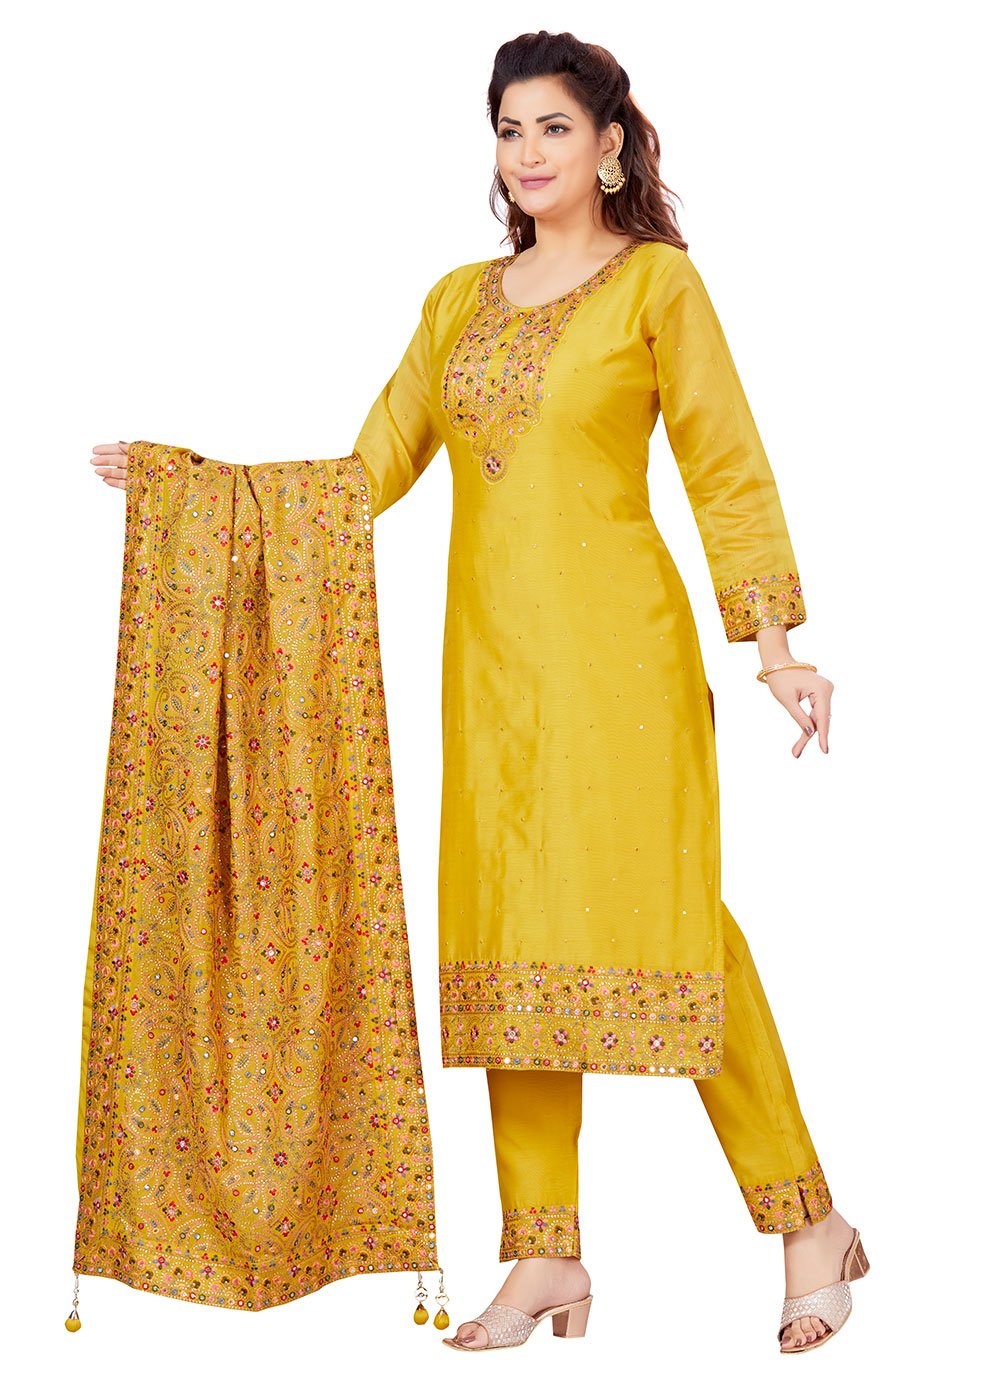 Pant Style Suit Chanderi Yellow Embroidered Salwar Kameez